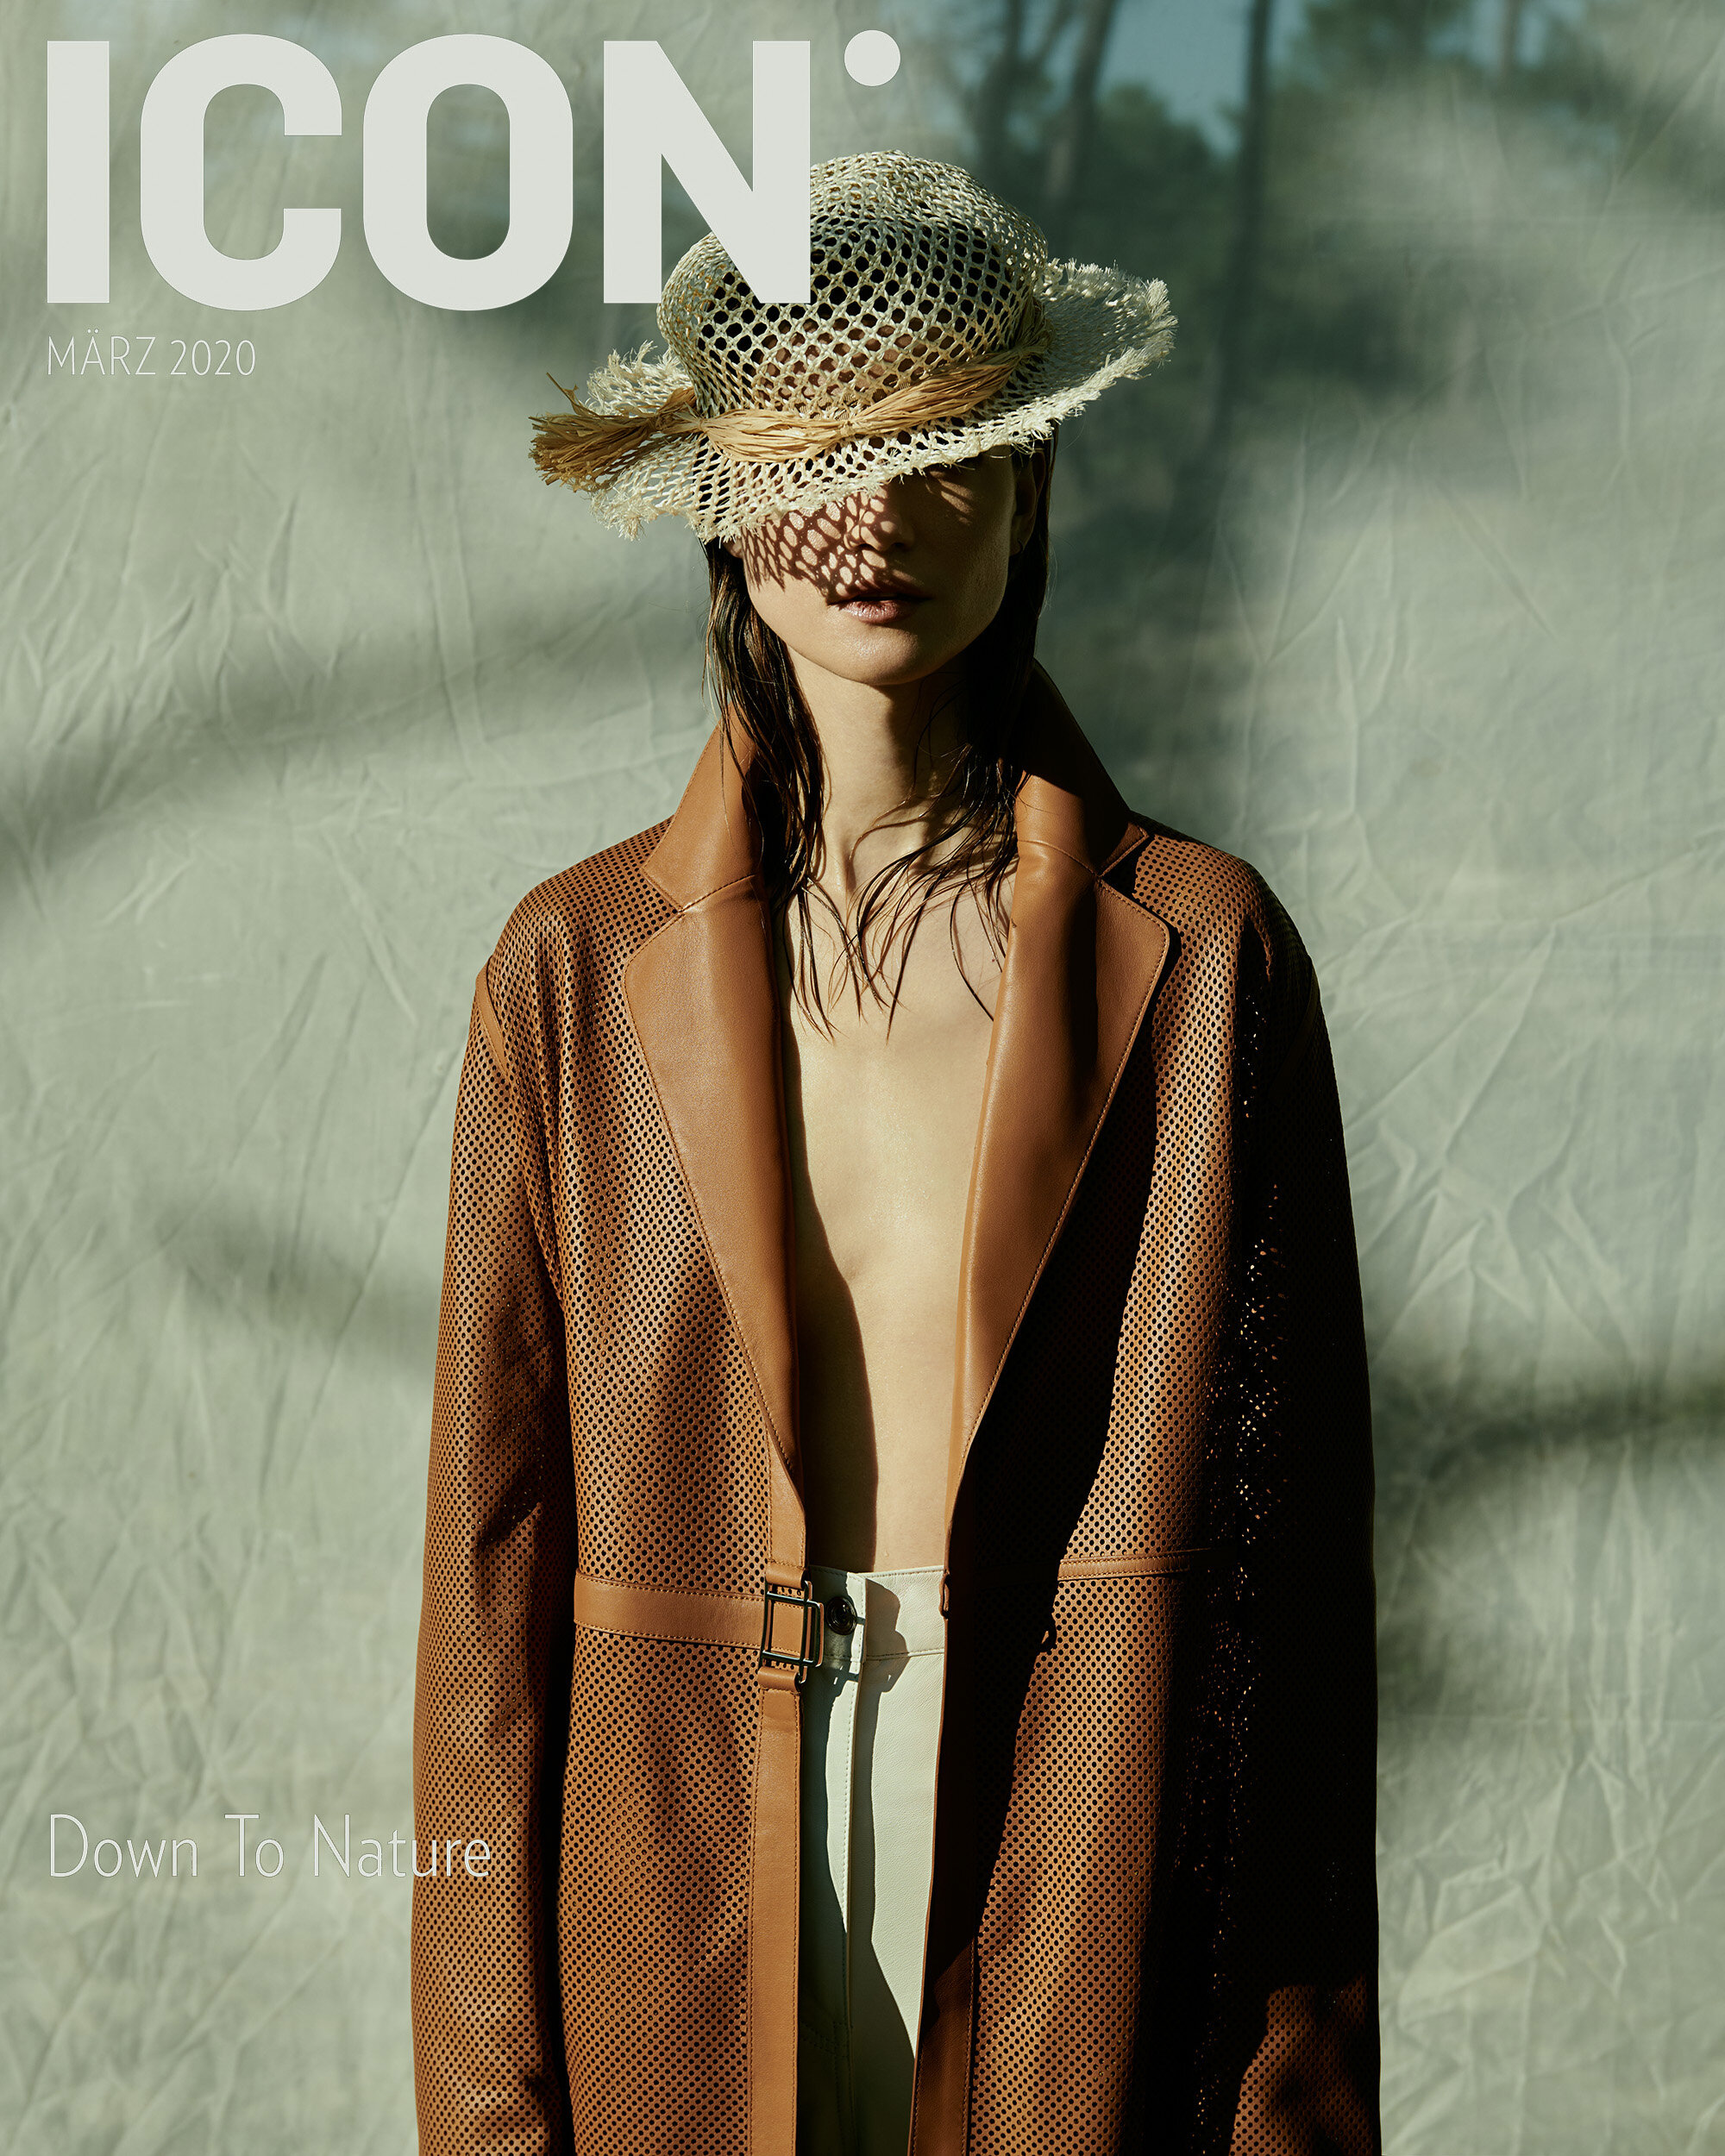 icon-cover2.jpg